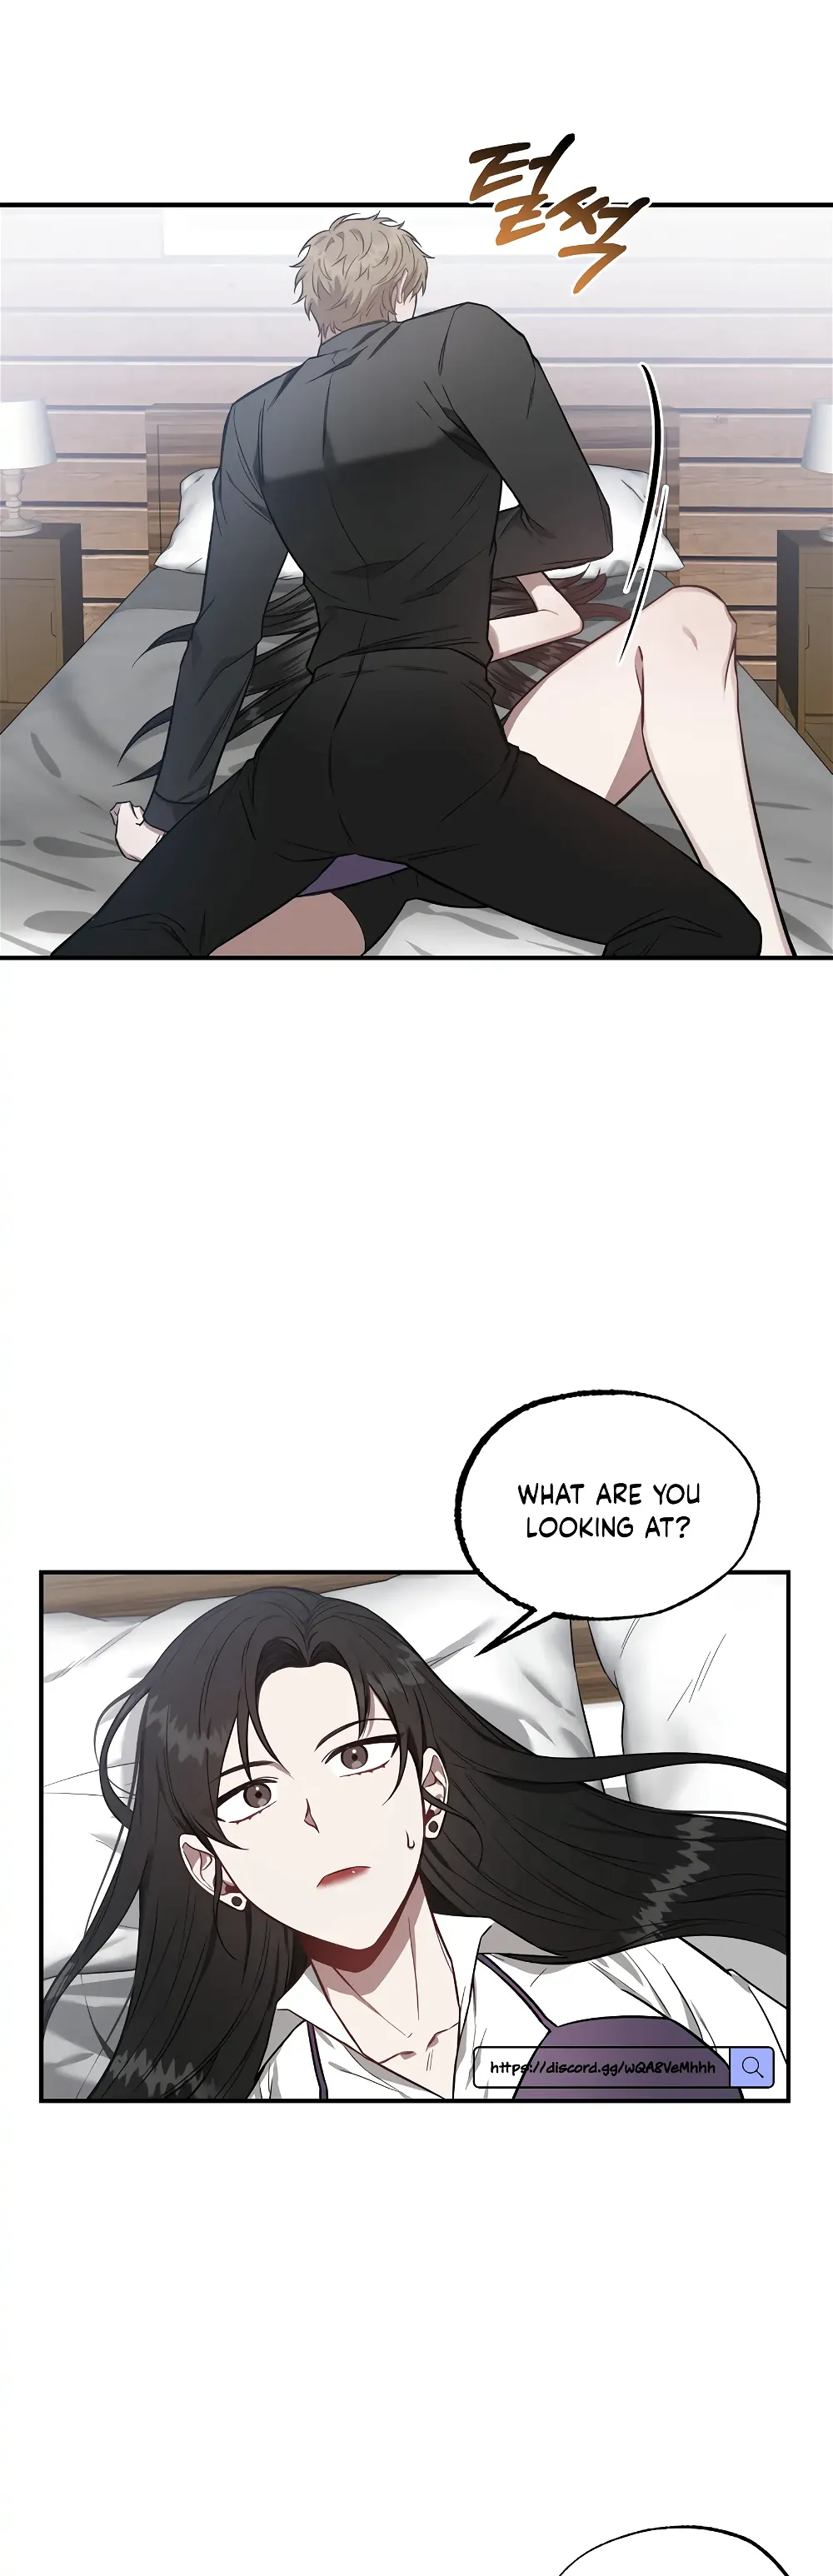 Mijeong’s Relationships chapter 1 - Page 19